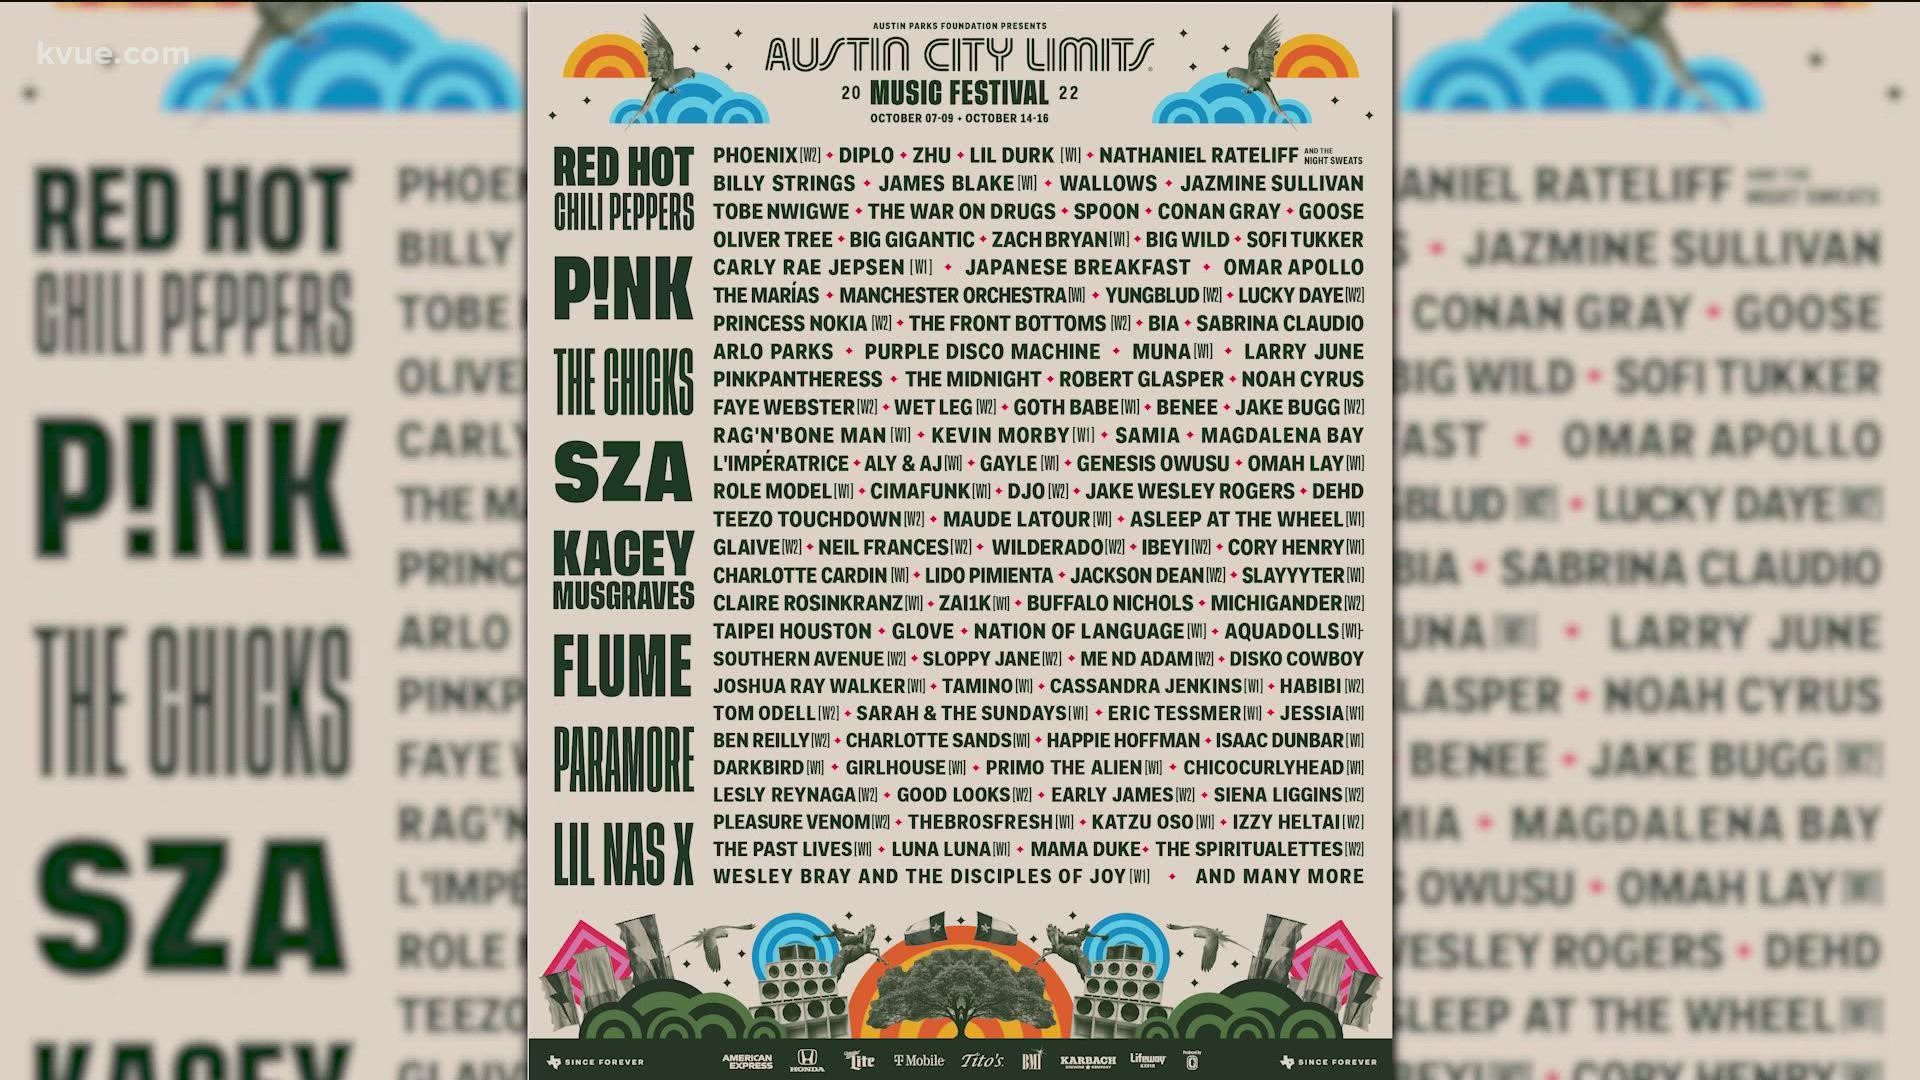 The ACL Festival 2022 lineup is out, and there are mixed reviews.